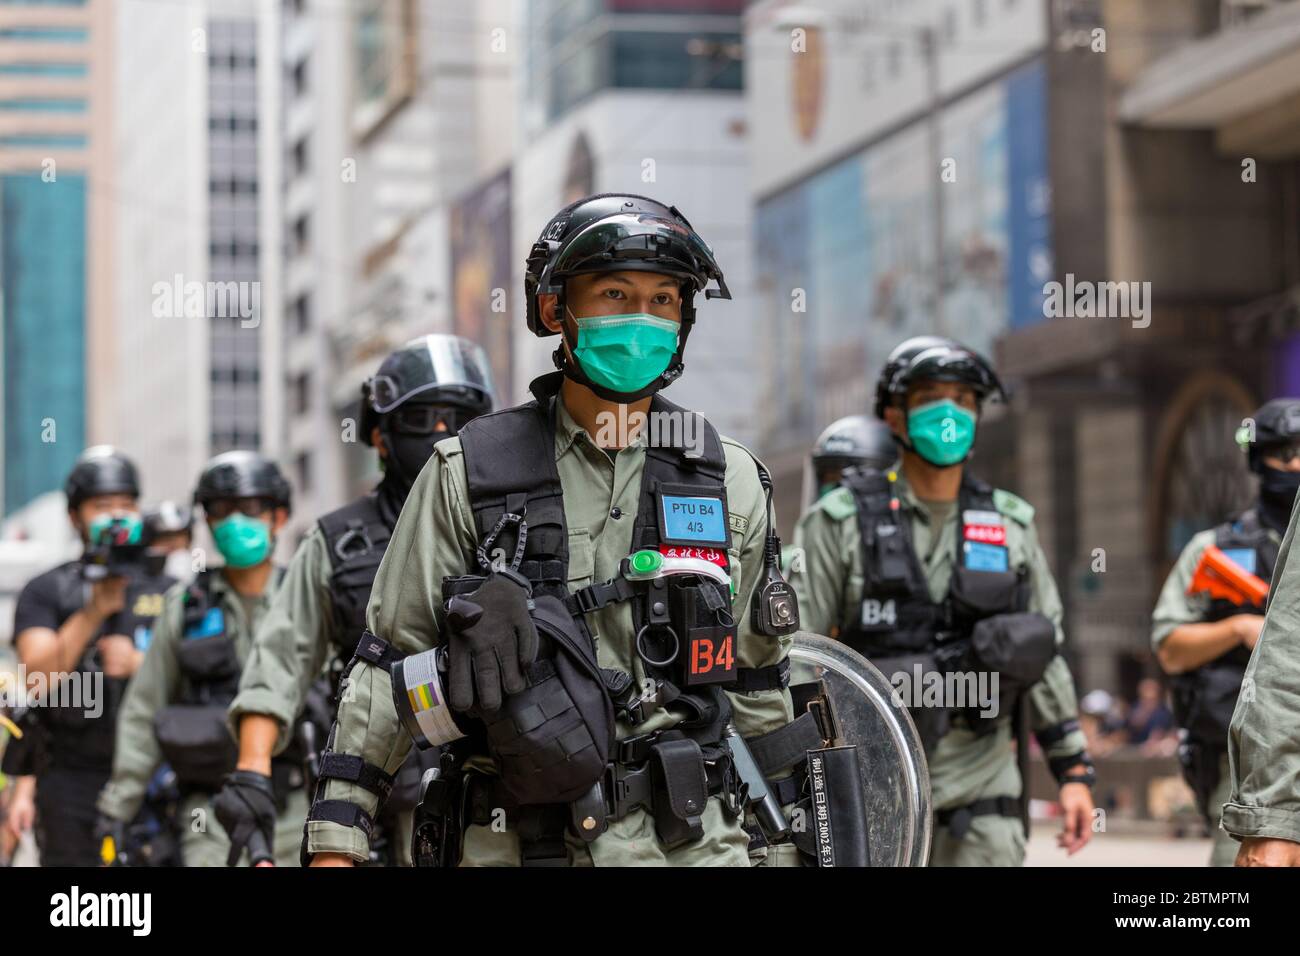 Central, Hong Kong. 27 May, 2020 Hong Kong Protest Anti-National Anthem Law. HK Police on the move. Credit: David Ogg / Alamy Live News Stock Photo